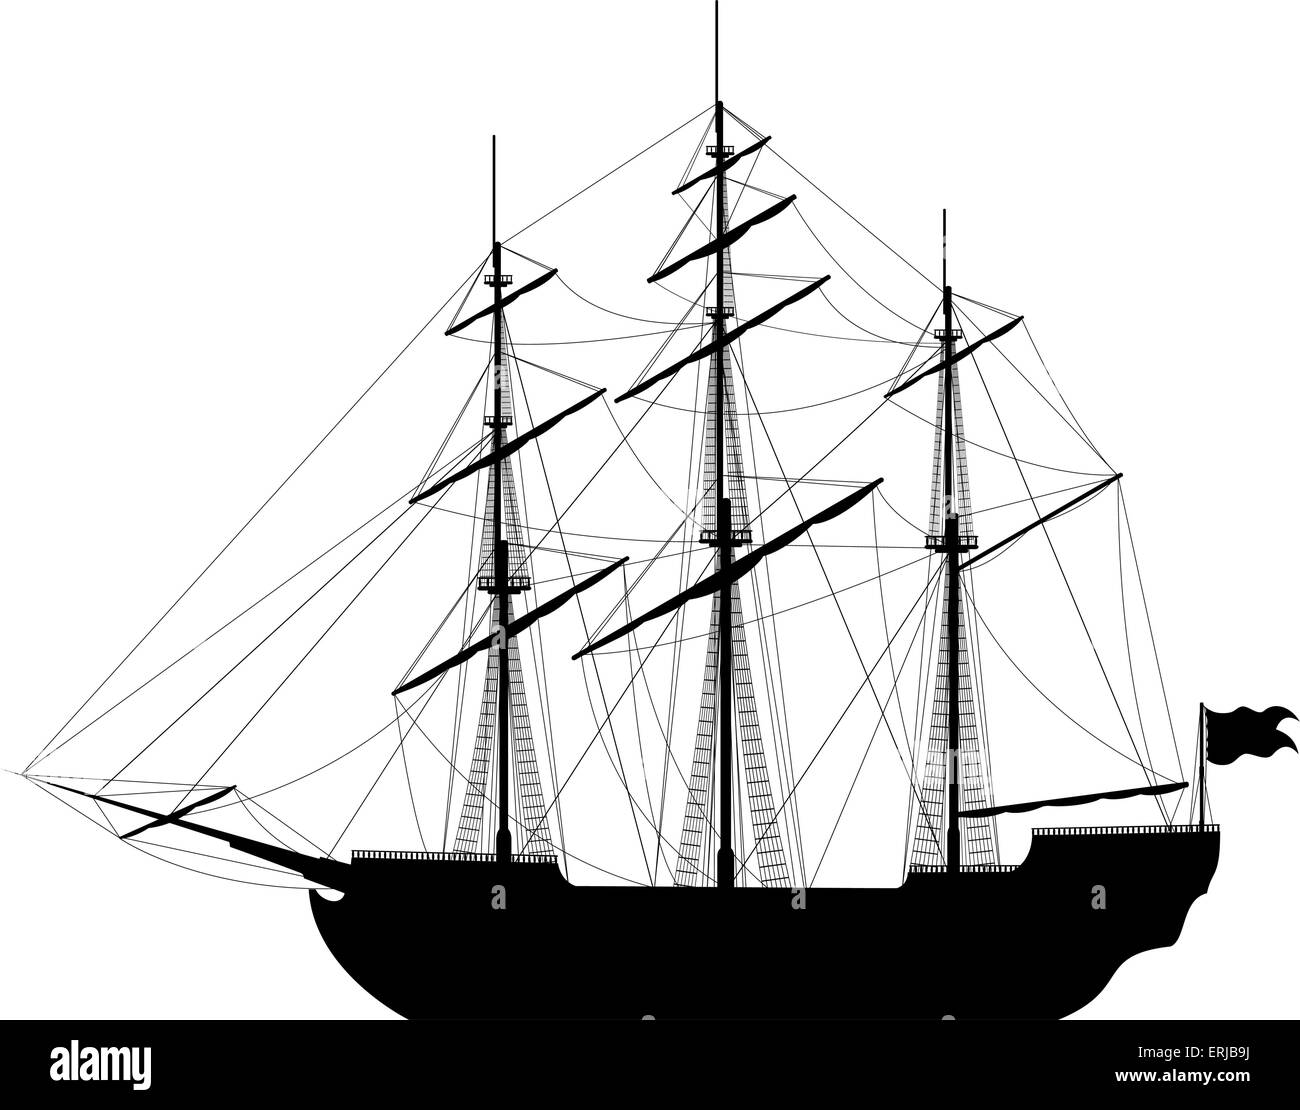 Large sailing ship. Detailed vector illustration of large black ship isolated on white background. Stock Vector